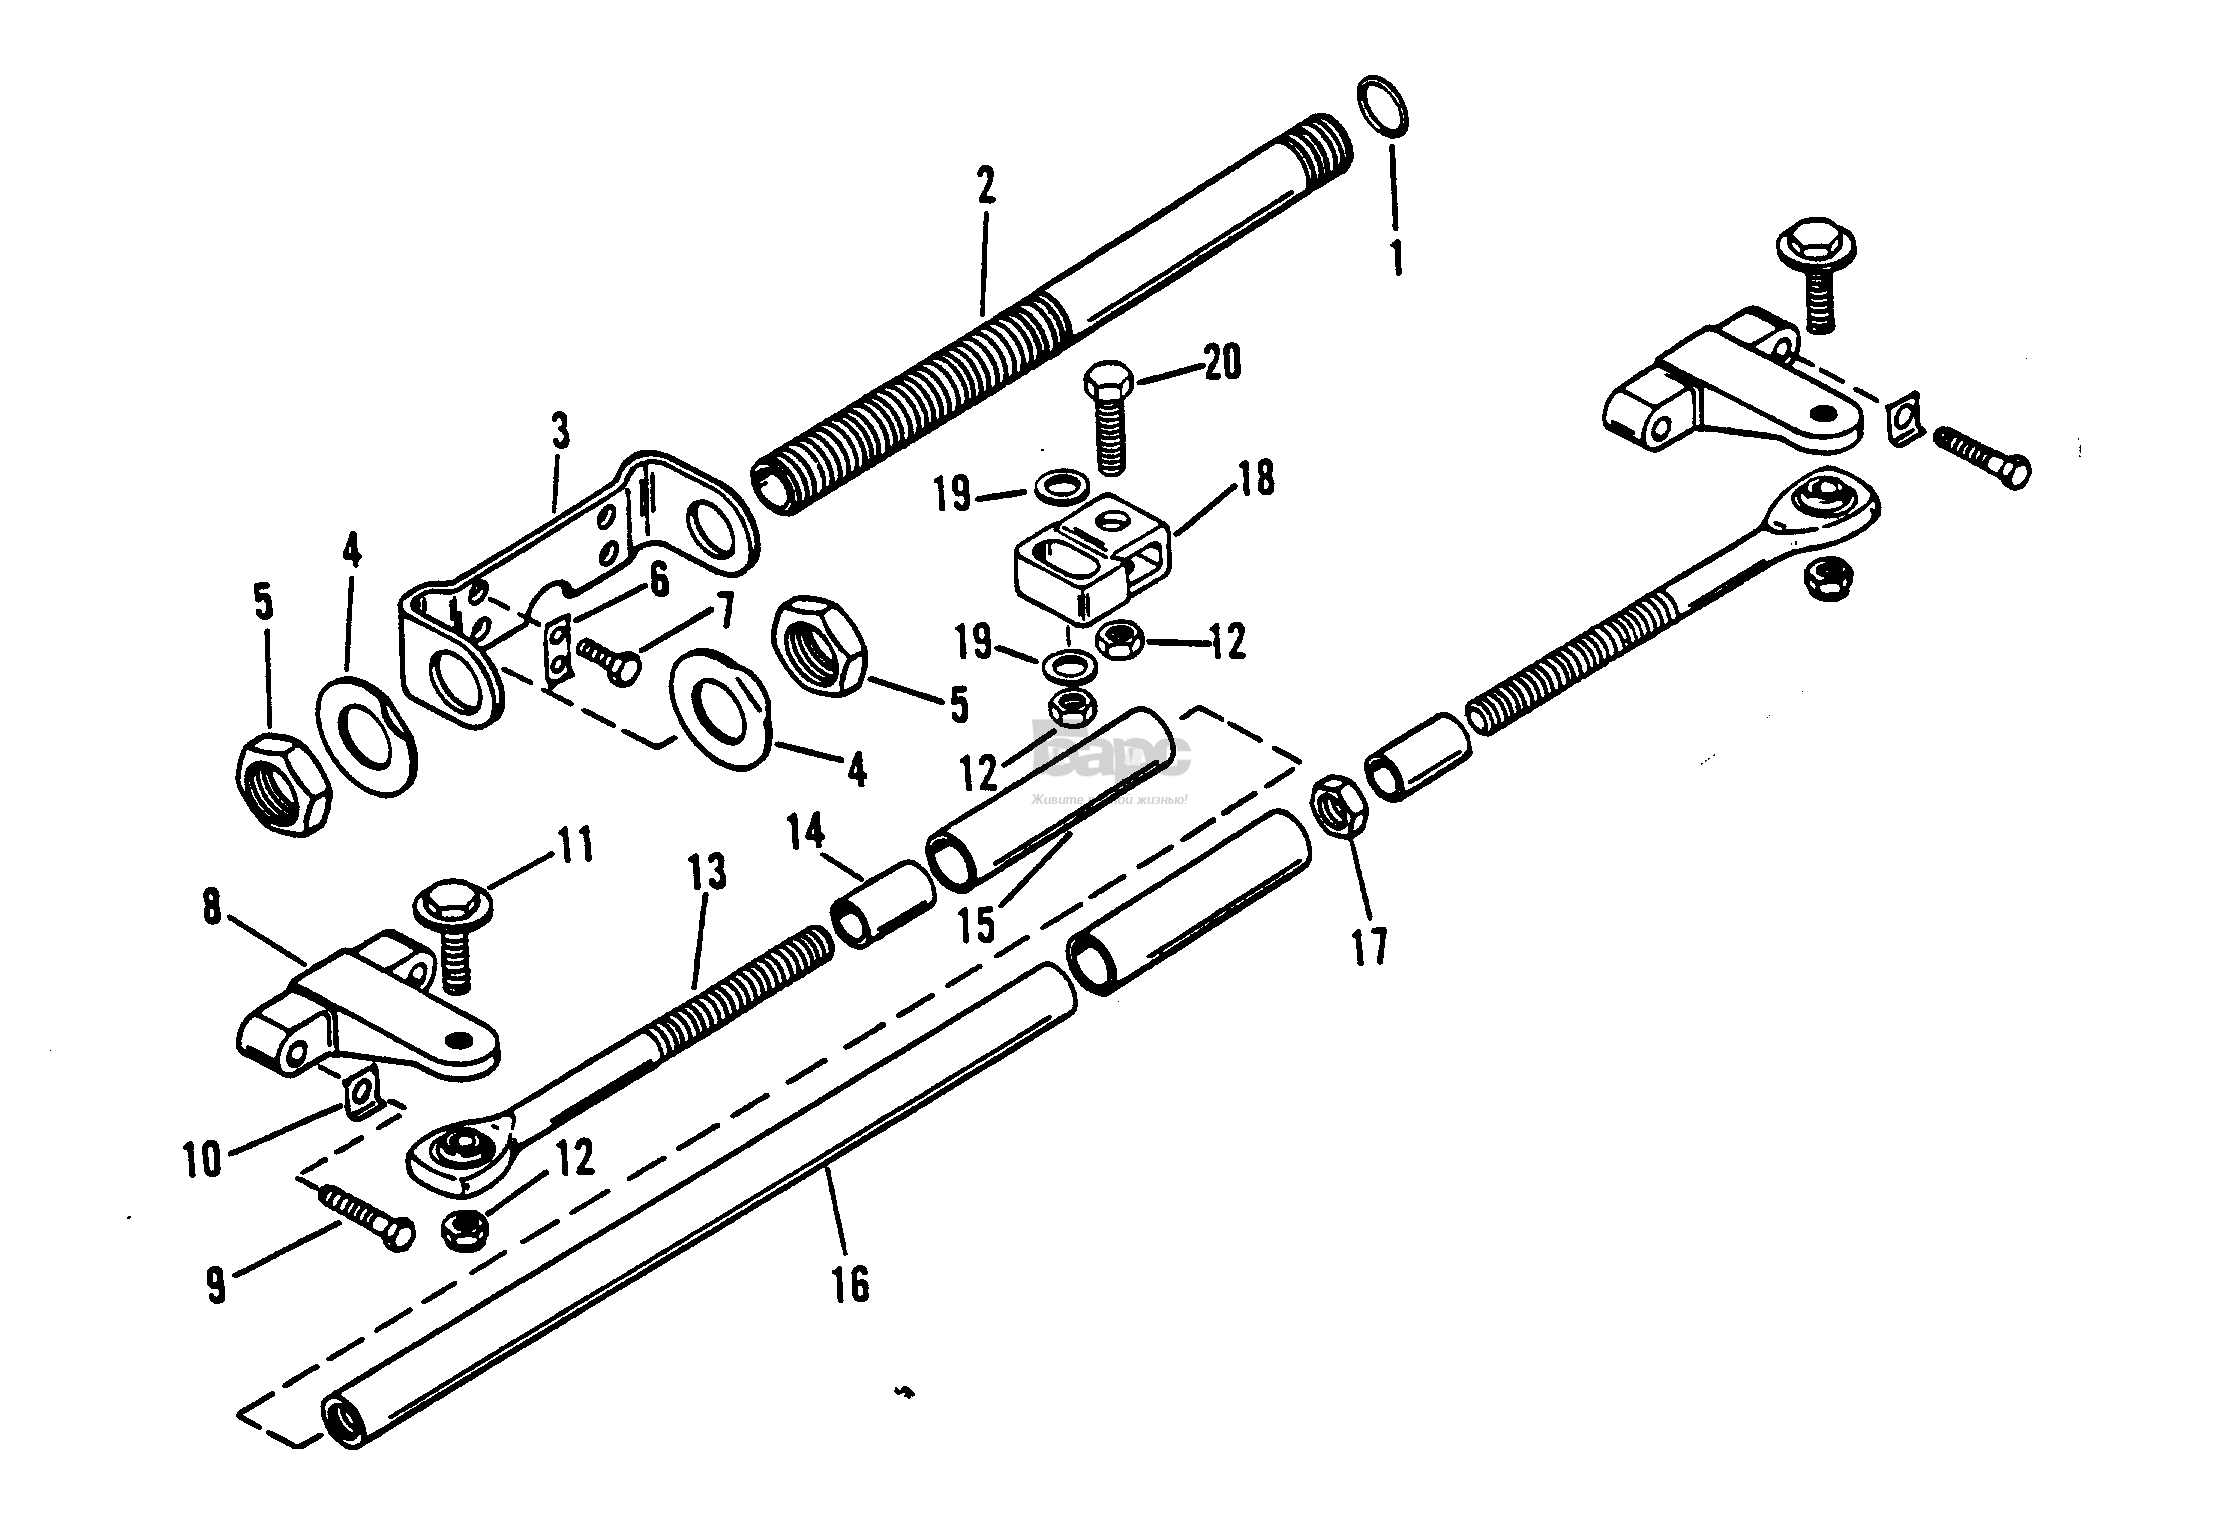 DUAL ENGINE EXTENSION KIT (COUNTER ROTATION DESIGN II)